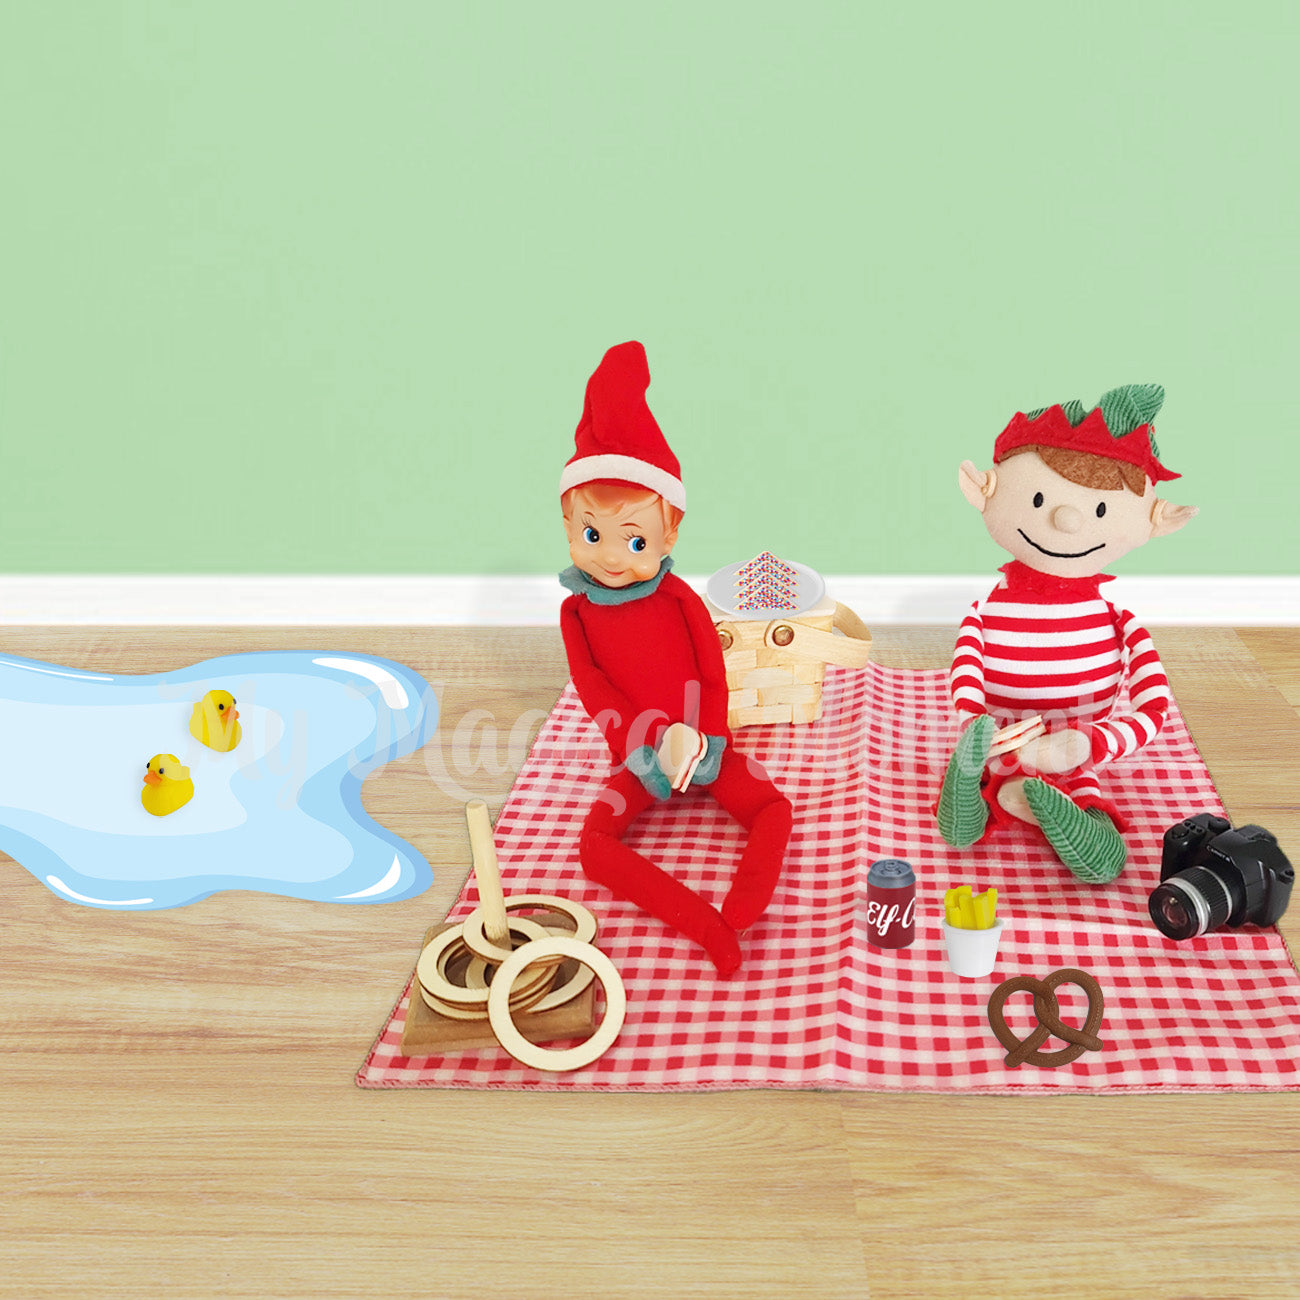 Picnic scene with elf for Christmas wearing hearing aids. There is a miniature picnic basket and ring toss with a puddle of water with ducks